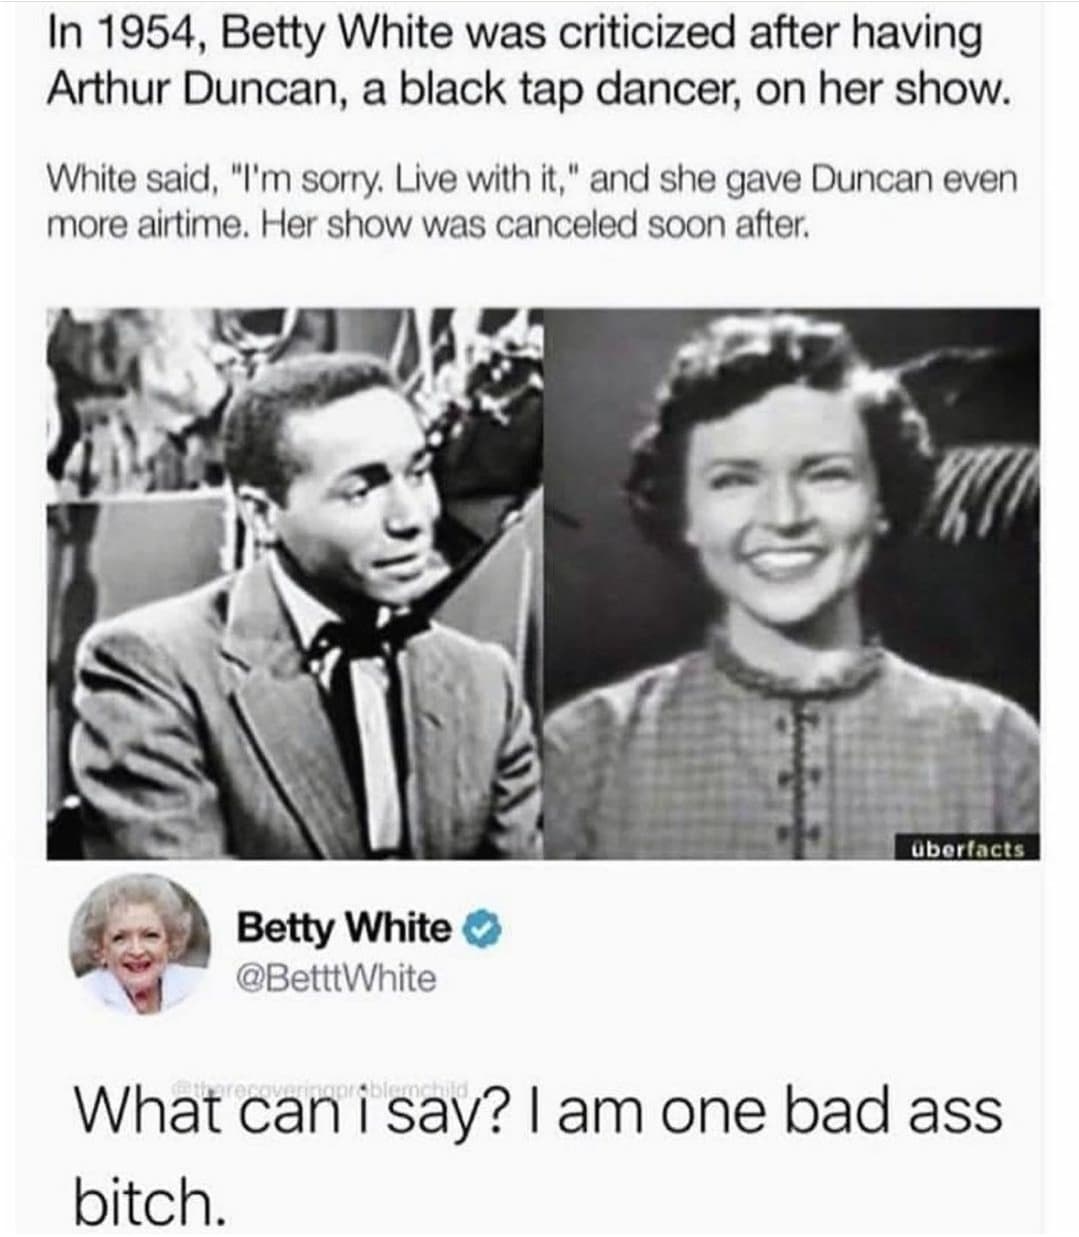 betty white badass tweet - In 1954, Betty White was criticized after having Arthur Duncan, a black tap dancer, on her show. White said, "I'm sorry. Live with it," and she gave Duncan even more airtime. Her show was canceled soon after. ubertacts Betty Whi